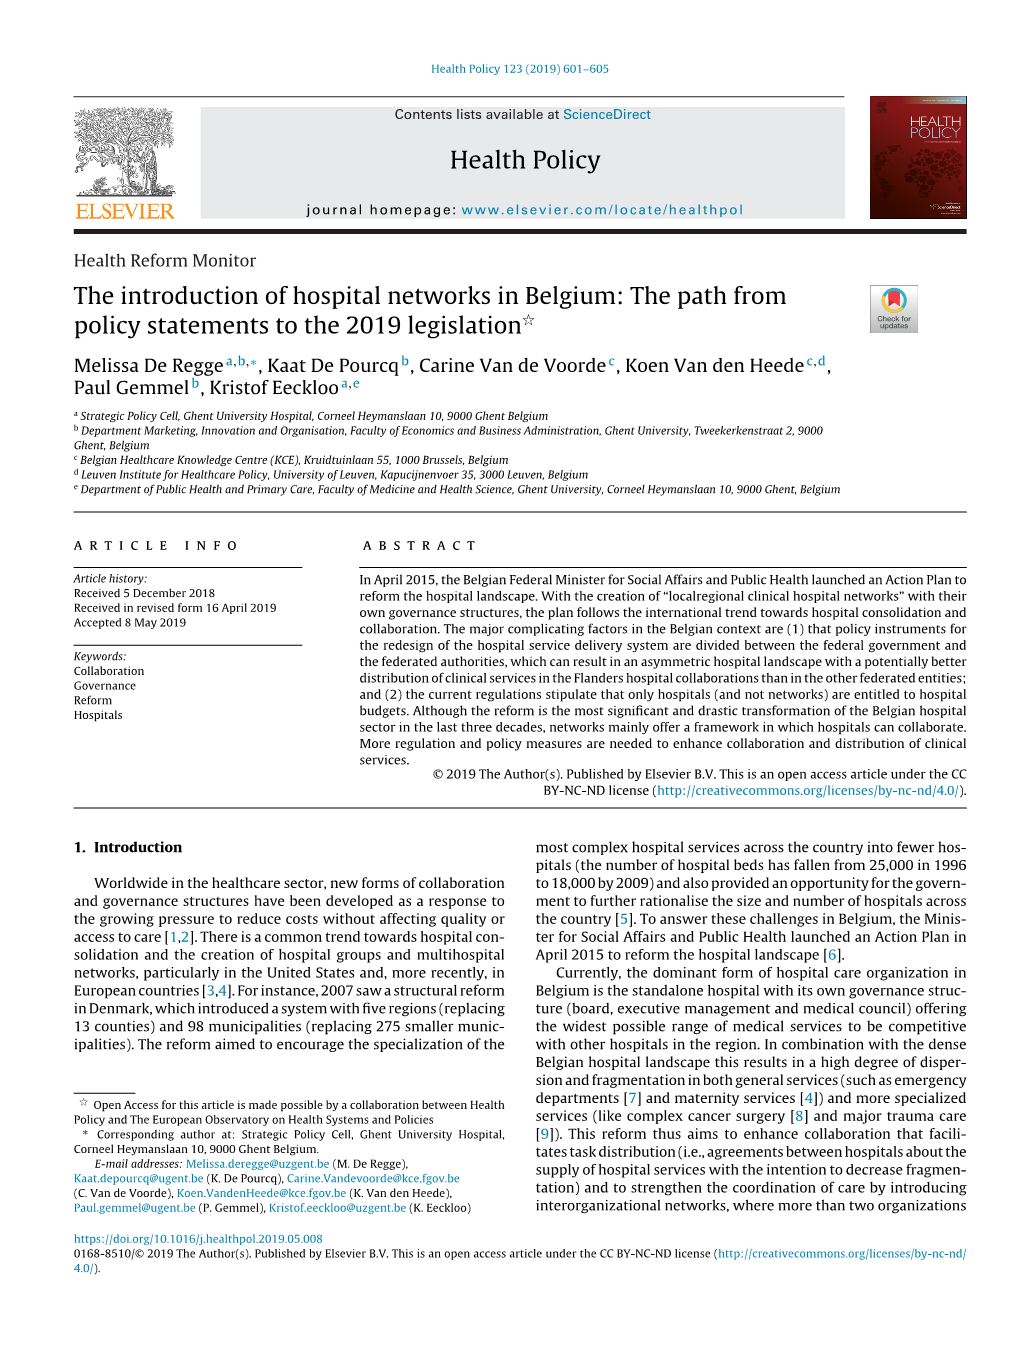 The Introduction of Hospital Networks in Belgium: the Path From